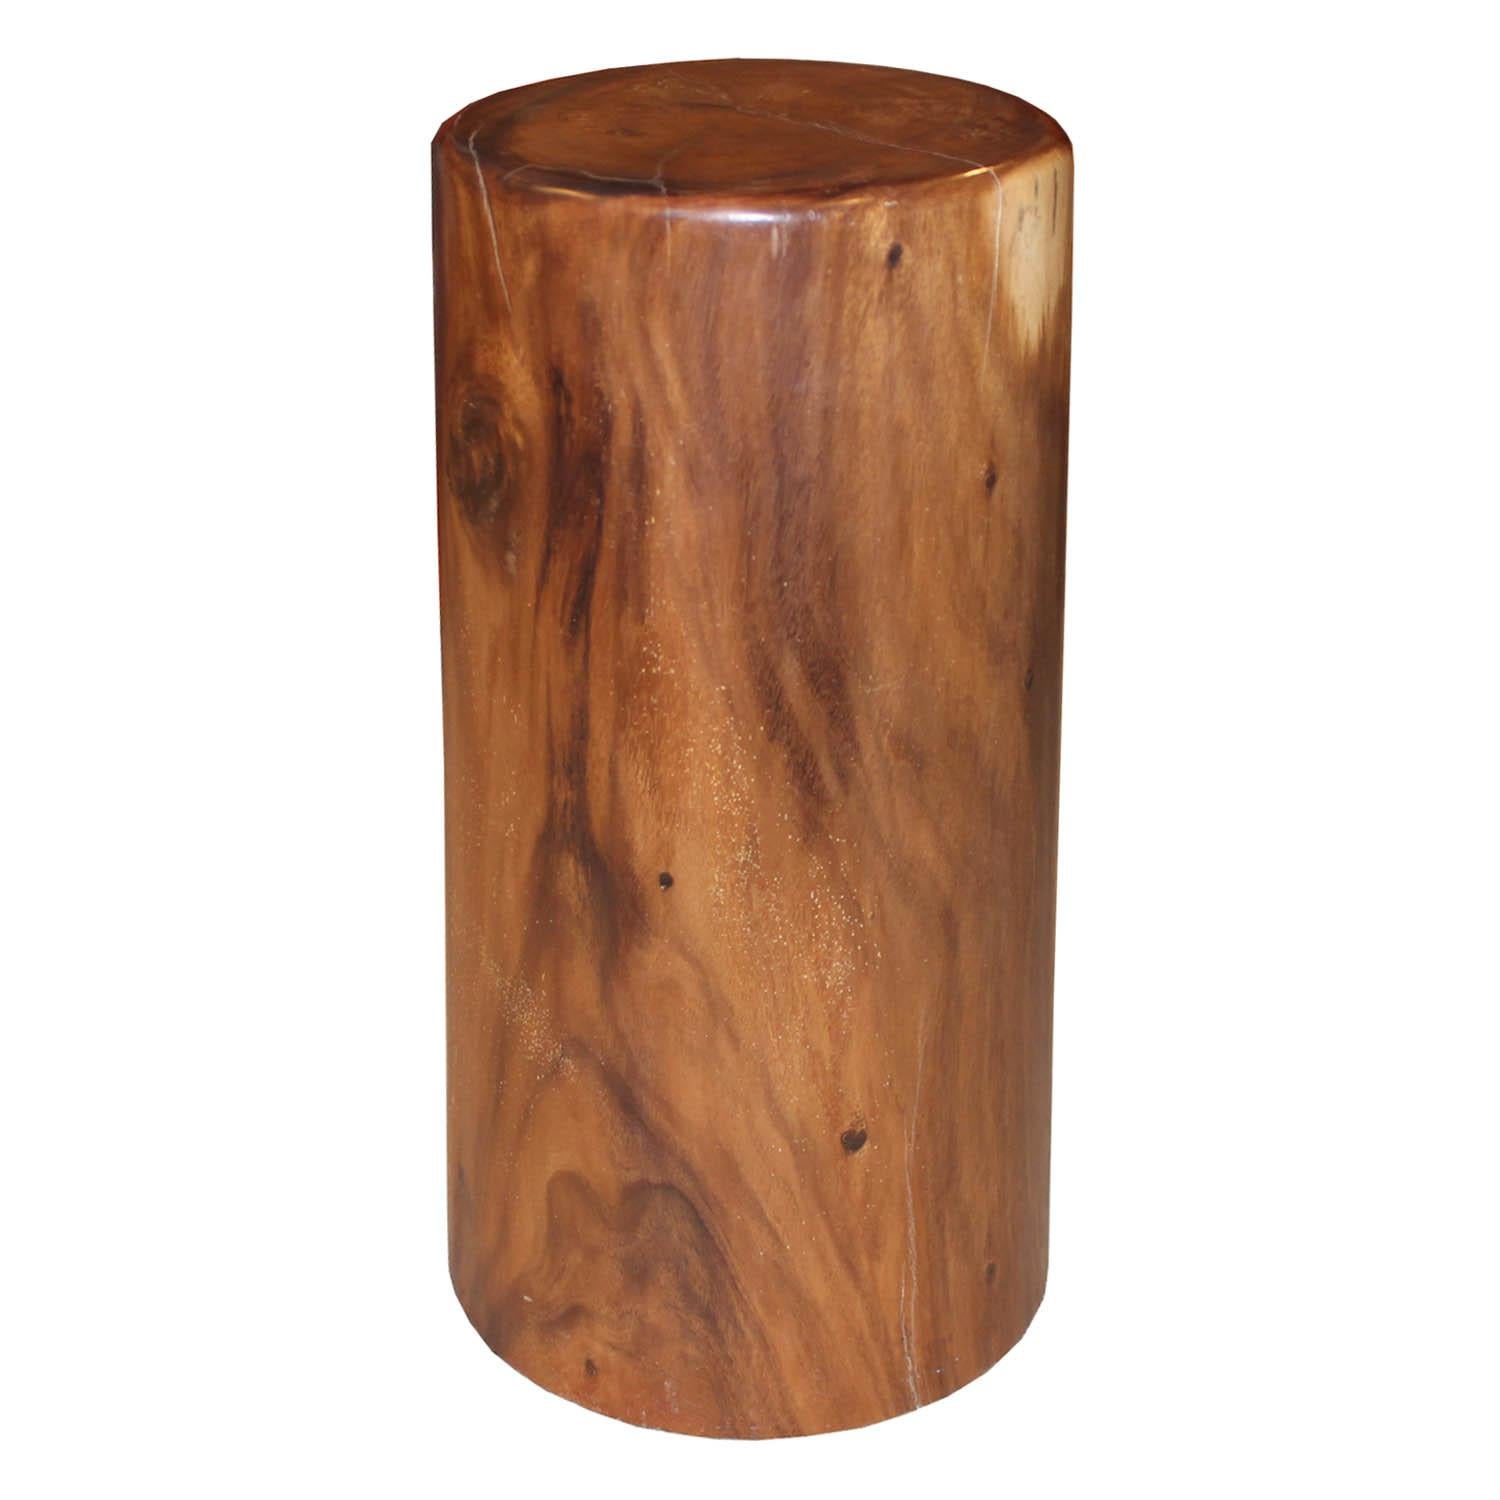 Beautiful Indonesian suar wood pedestal can be used as a base for art or as a side table.